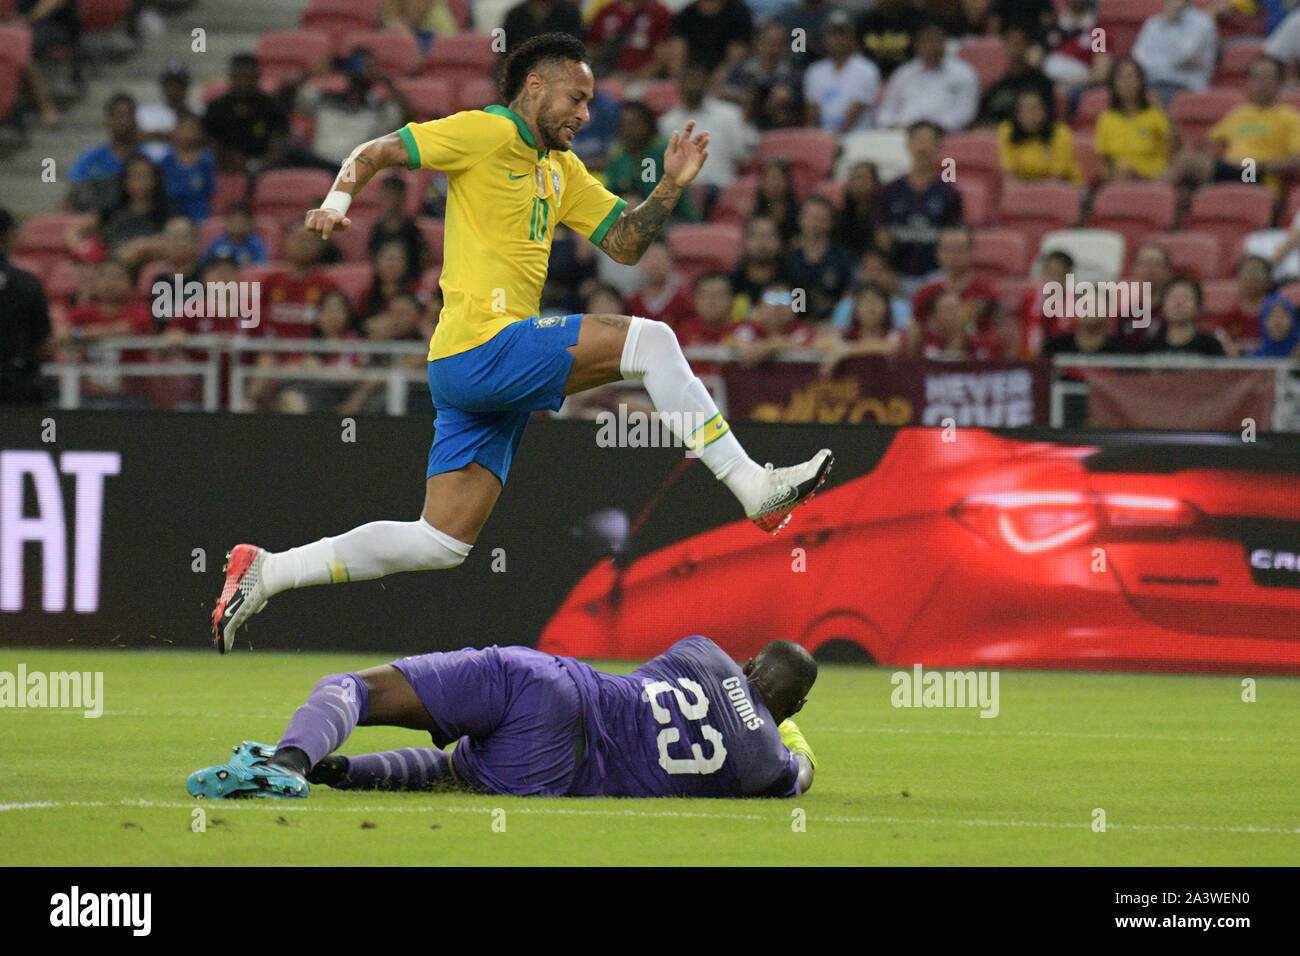 Singapore. 10th Oct, 2019. Neymar(Top) of Brazil competes during the friendly match between Brazil and Senegal held at the National Stadium in Singapore, on Oct 10, 2019. Credit: Photo by Then Chih Wey/Xinhua/Alamy Live News Stock Photo